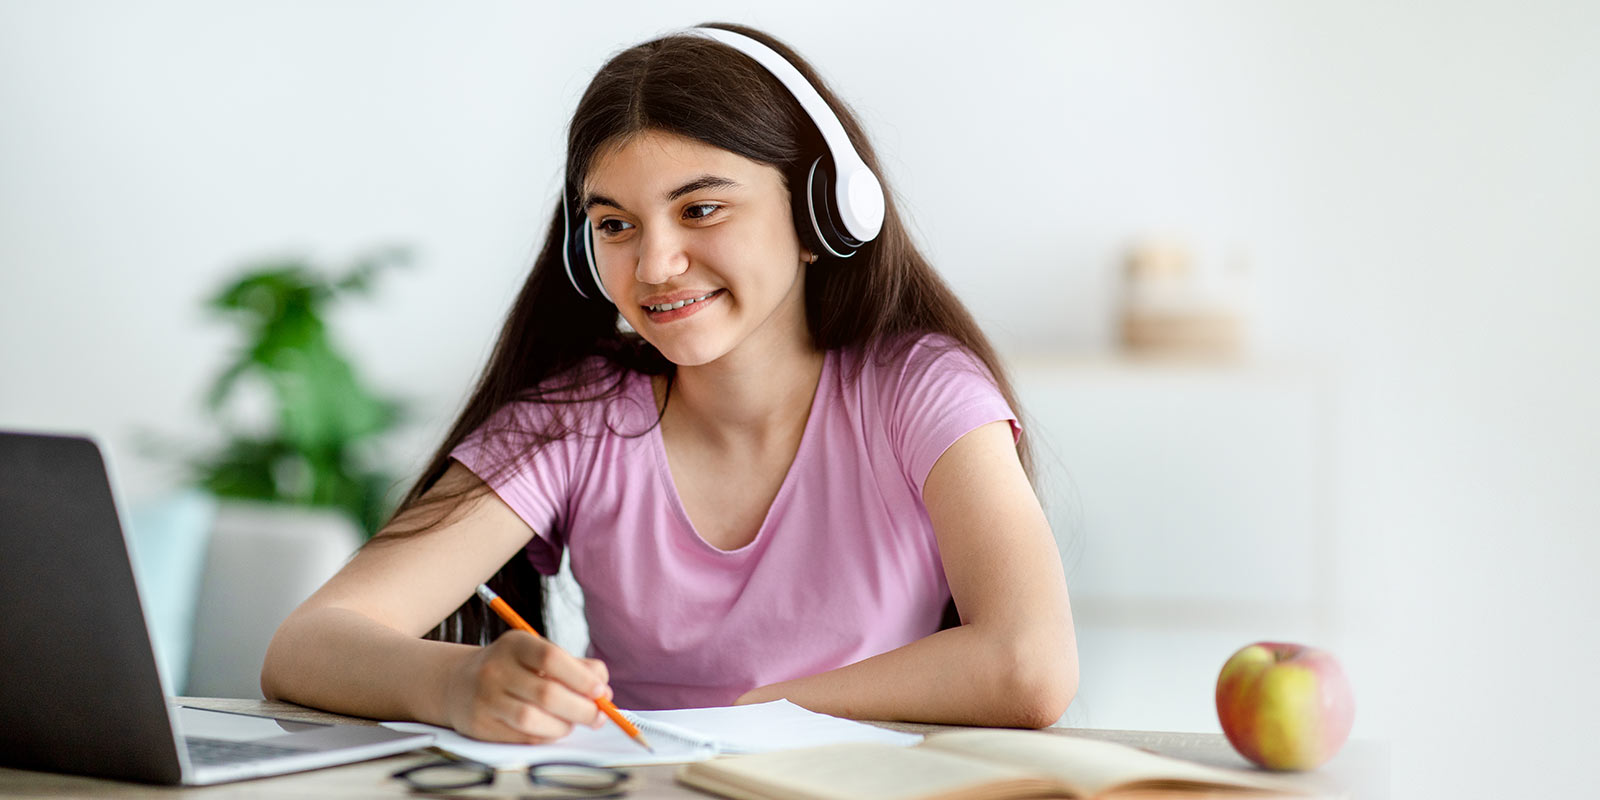 High school female student sitting in front of a laptop with headphones on.